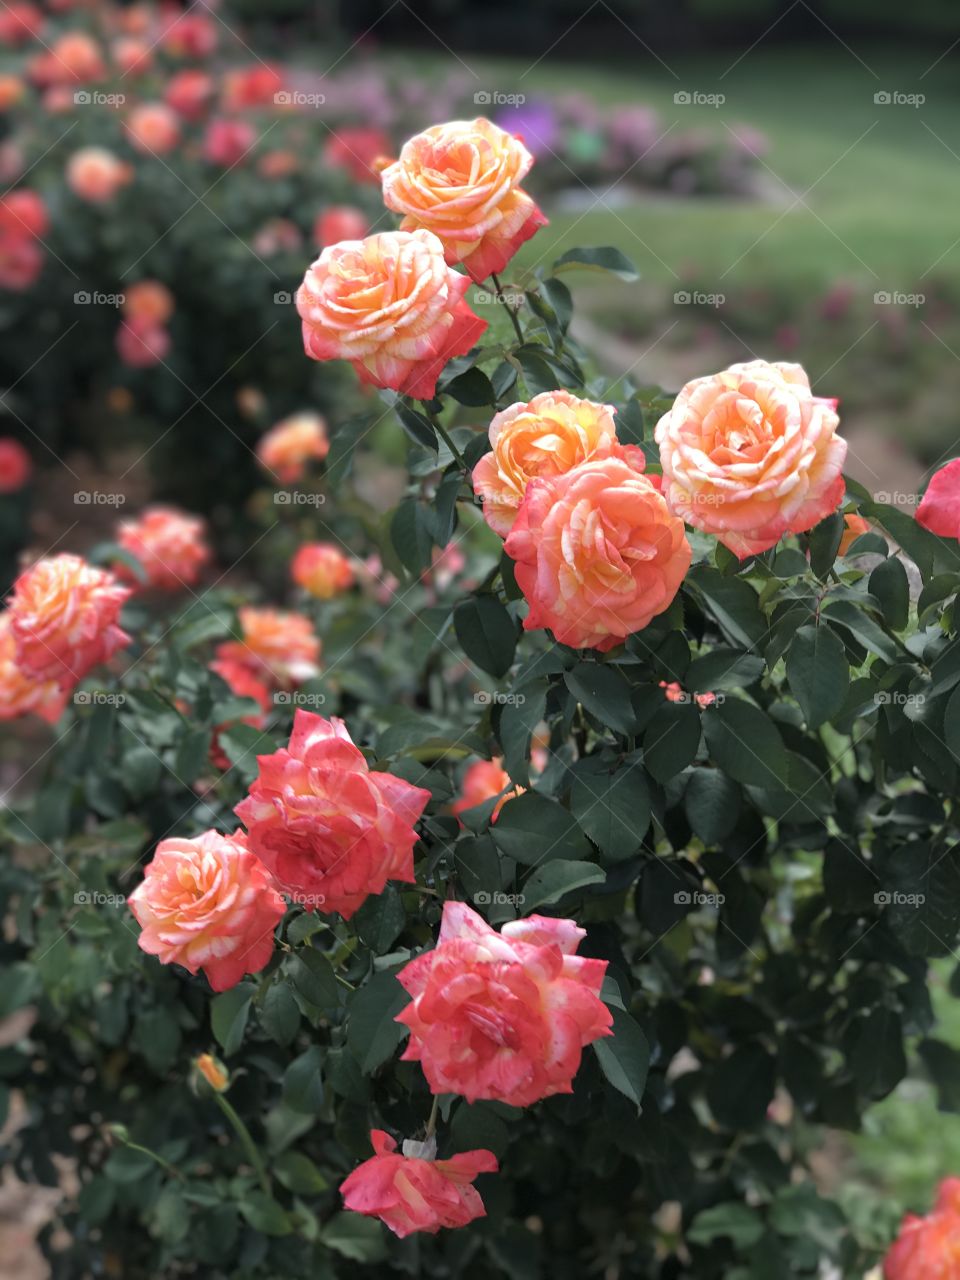 Close-up of fresh pink roses blooming in garden